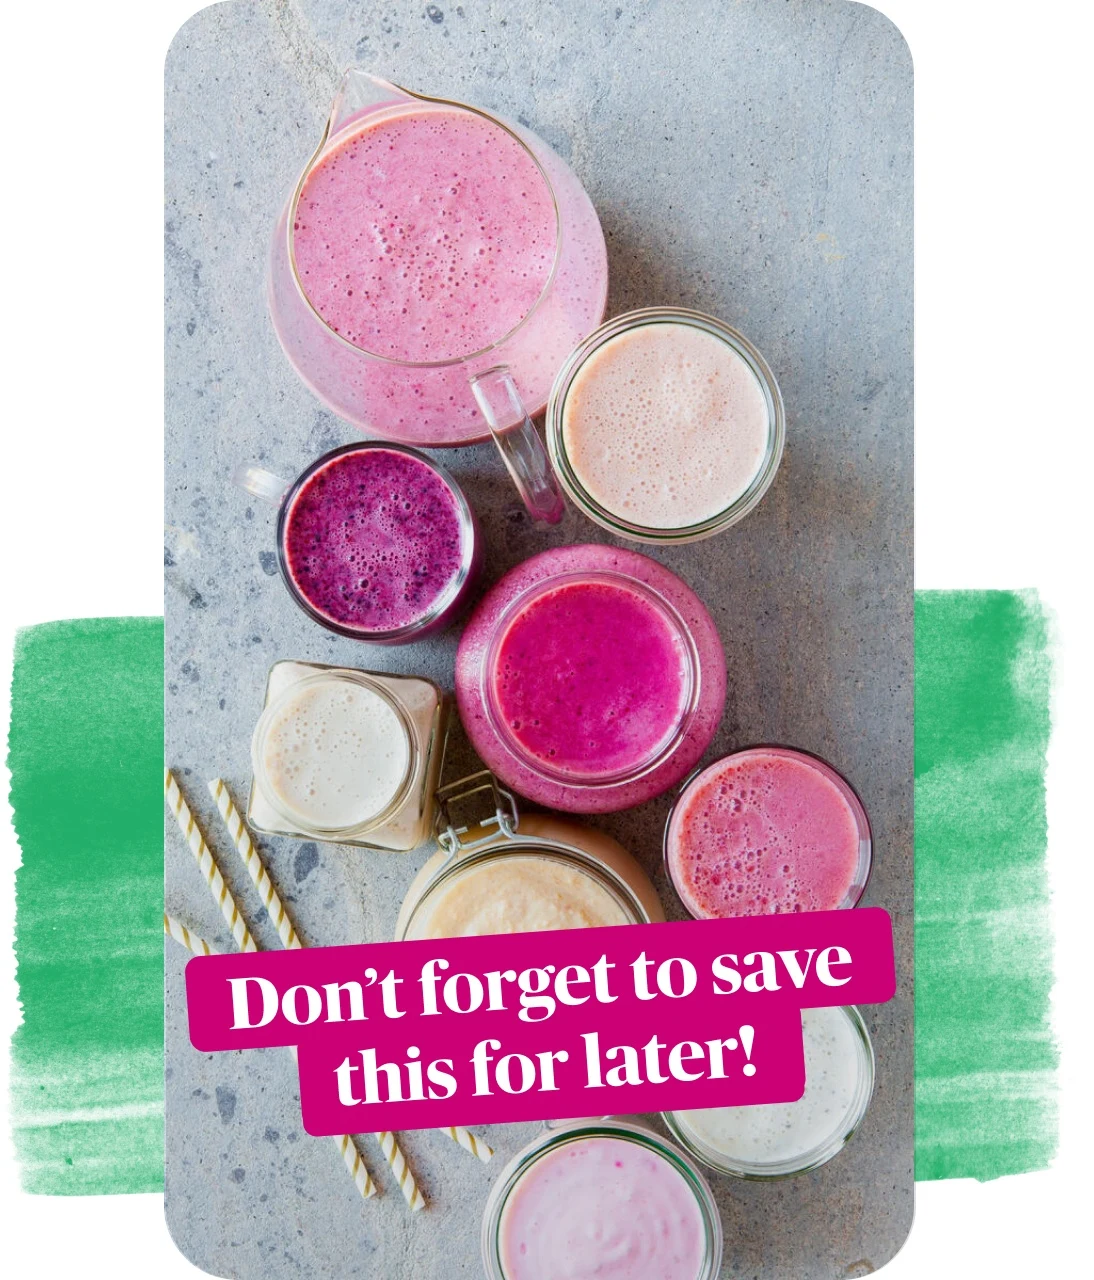 Don't forget to save text label on pink background overlaid on pin of juice in glasses